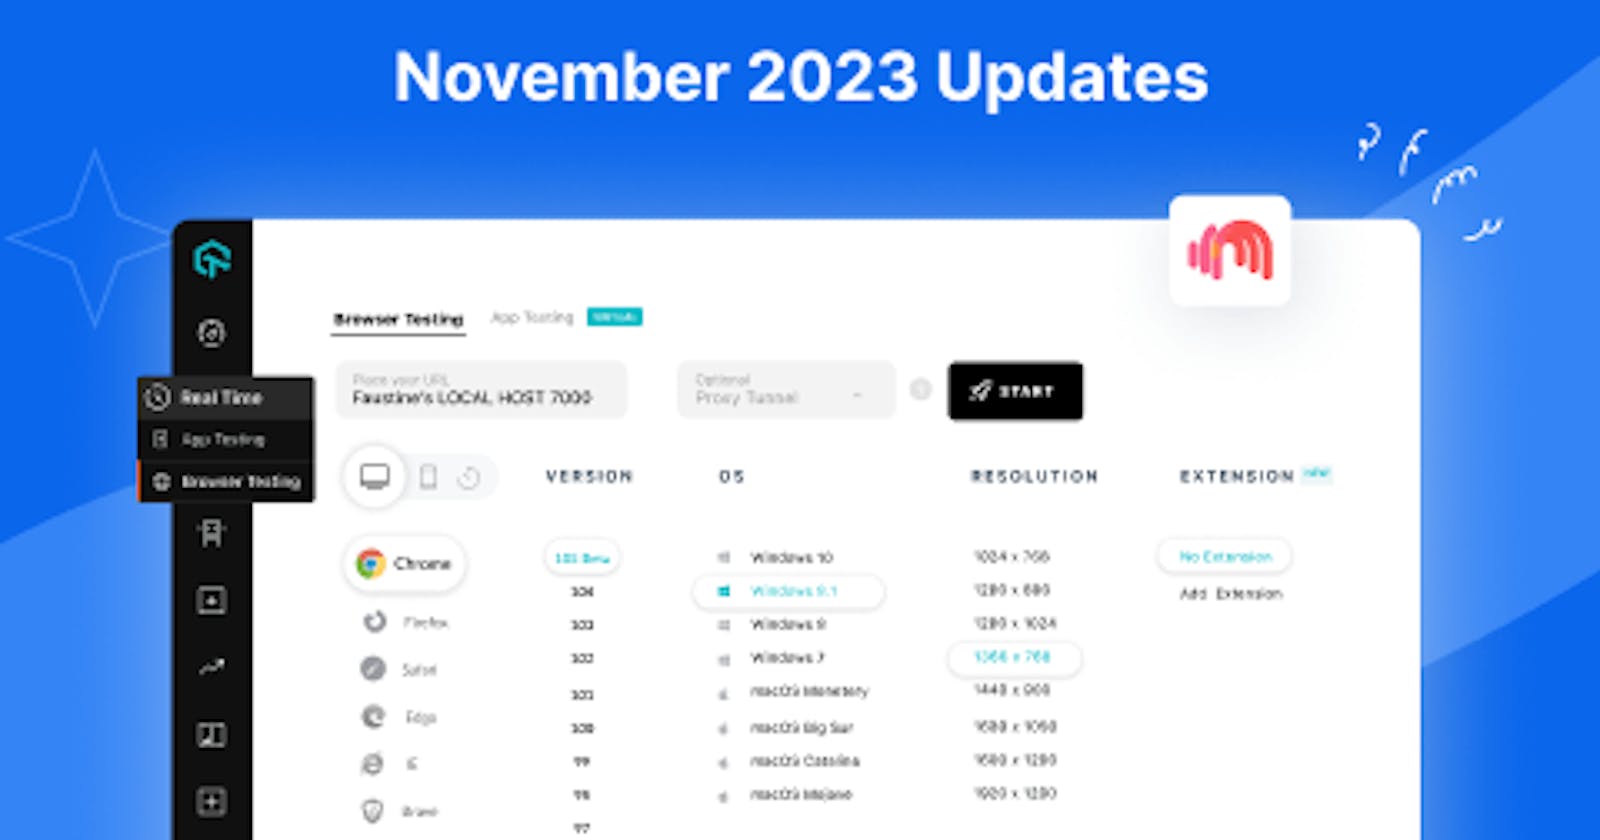 November’23 Updates: The All-New UnderPass Desktop Application, Auto Muting With HyperExecute, and More!